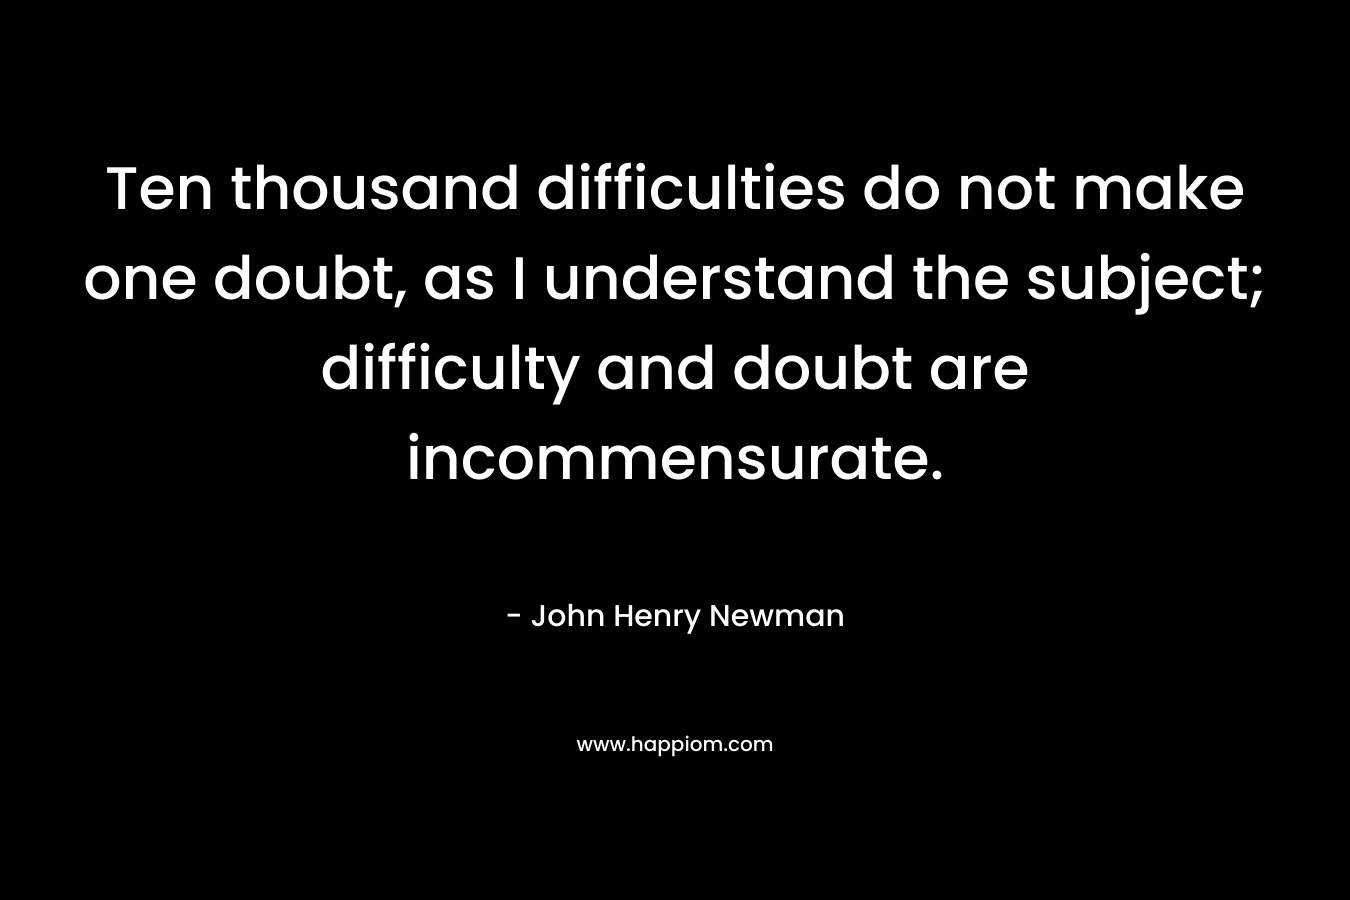 Ten thousand difficulties do not make one doubt, as I understand the subject; difficulty and doubt are incommensurate. – John Henry Newman